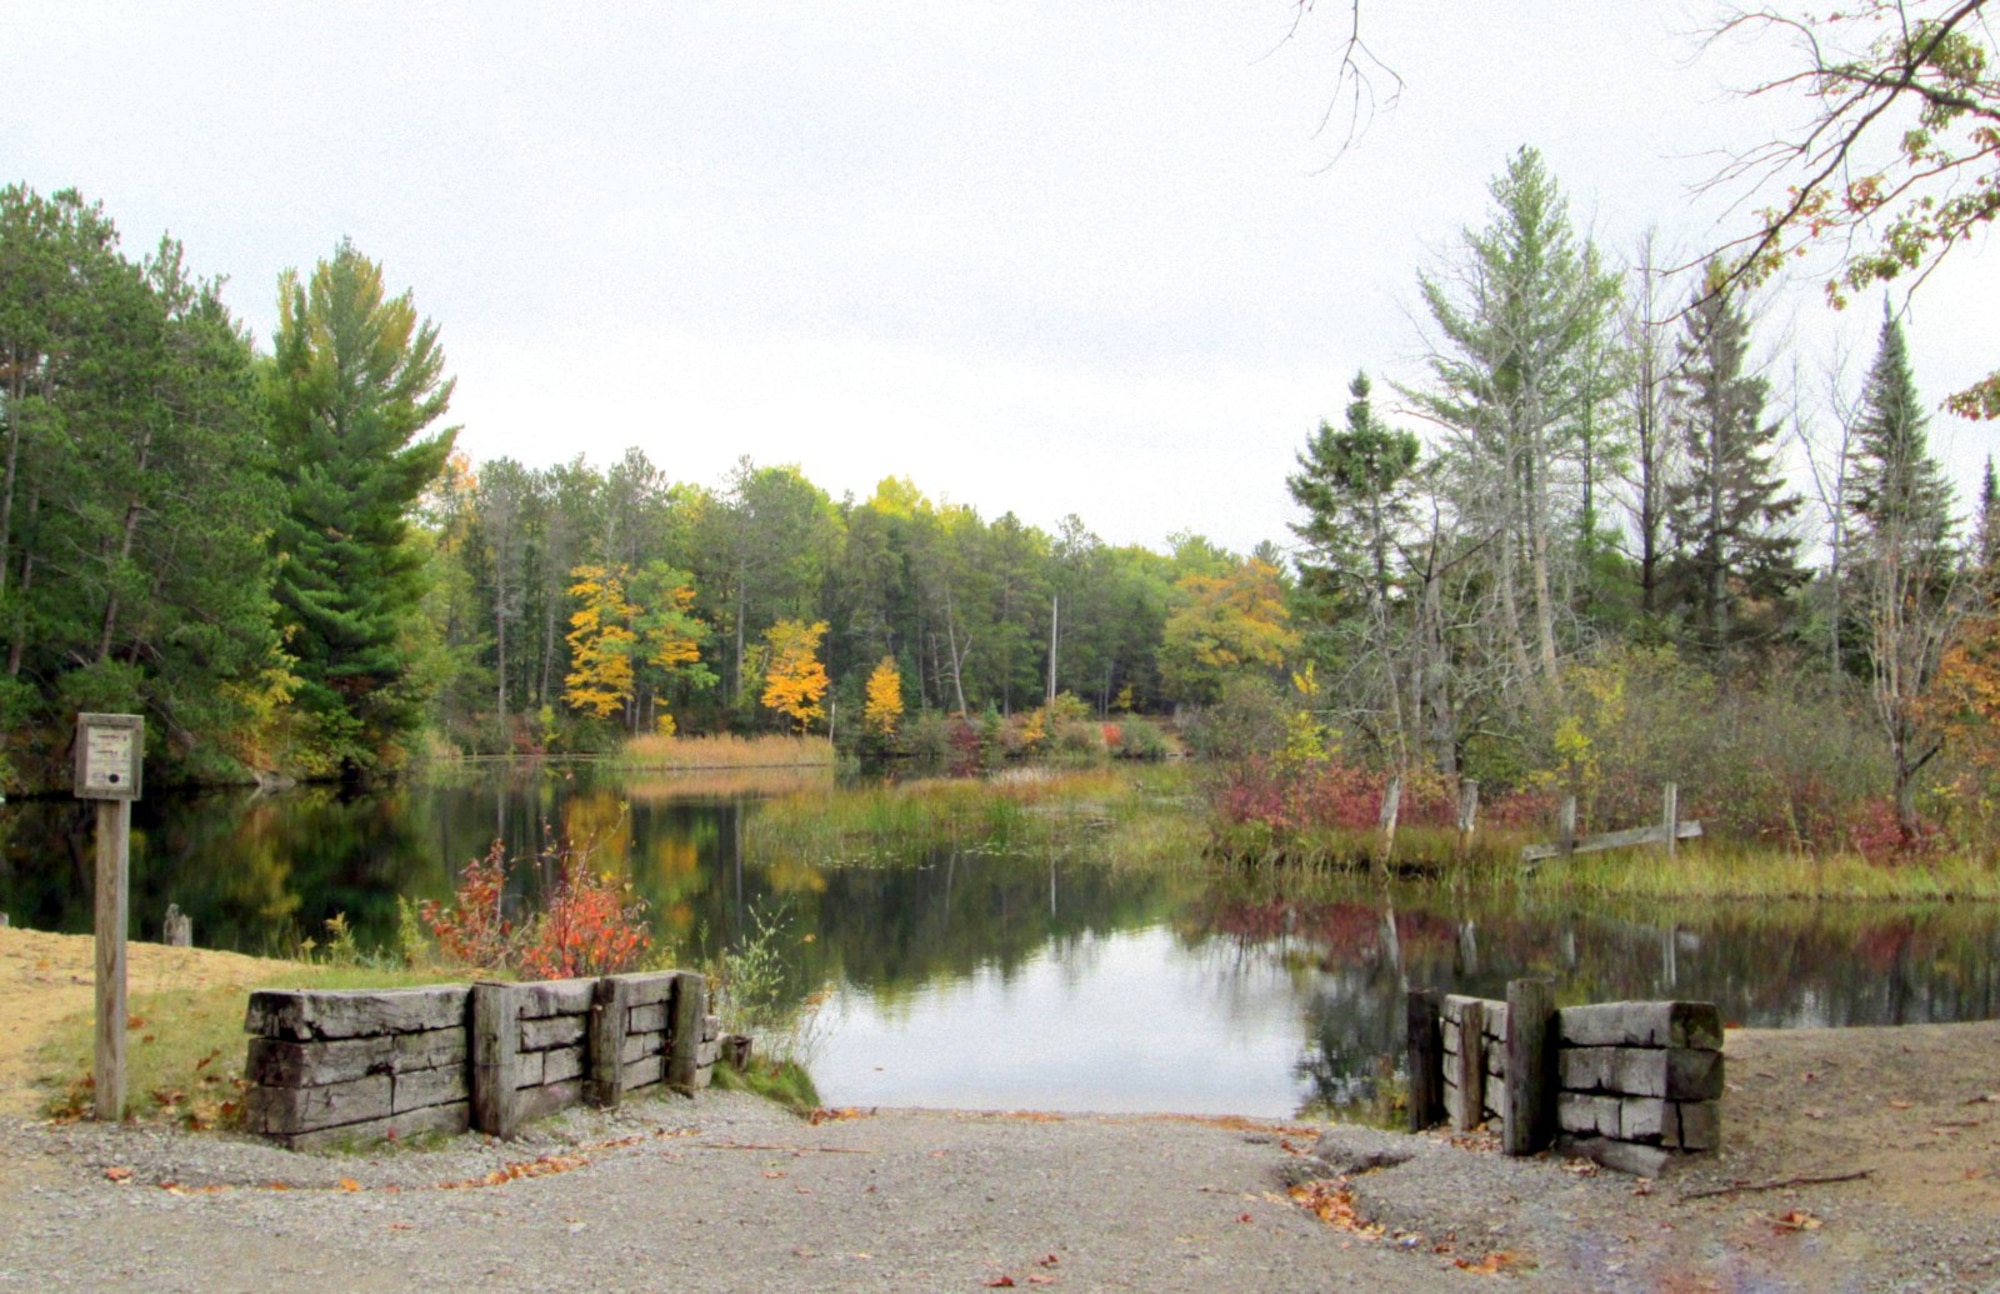 Around the campground offers river access for fishing, canoeing and kayaking.